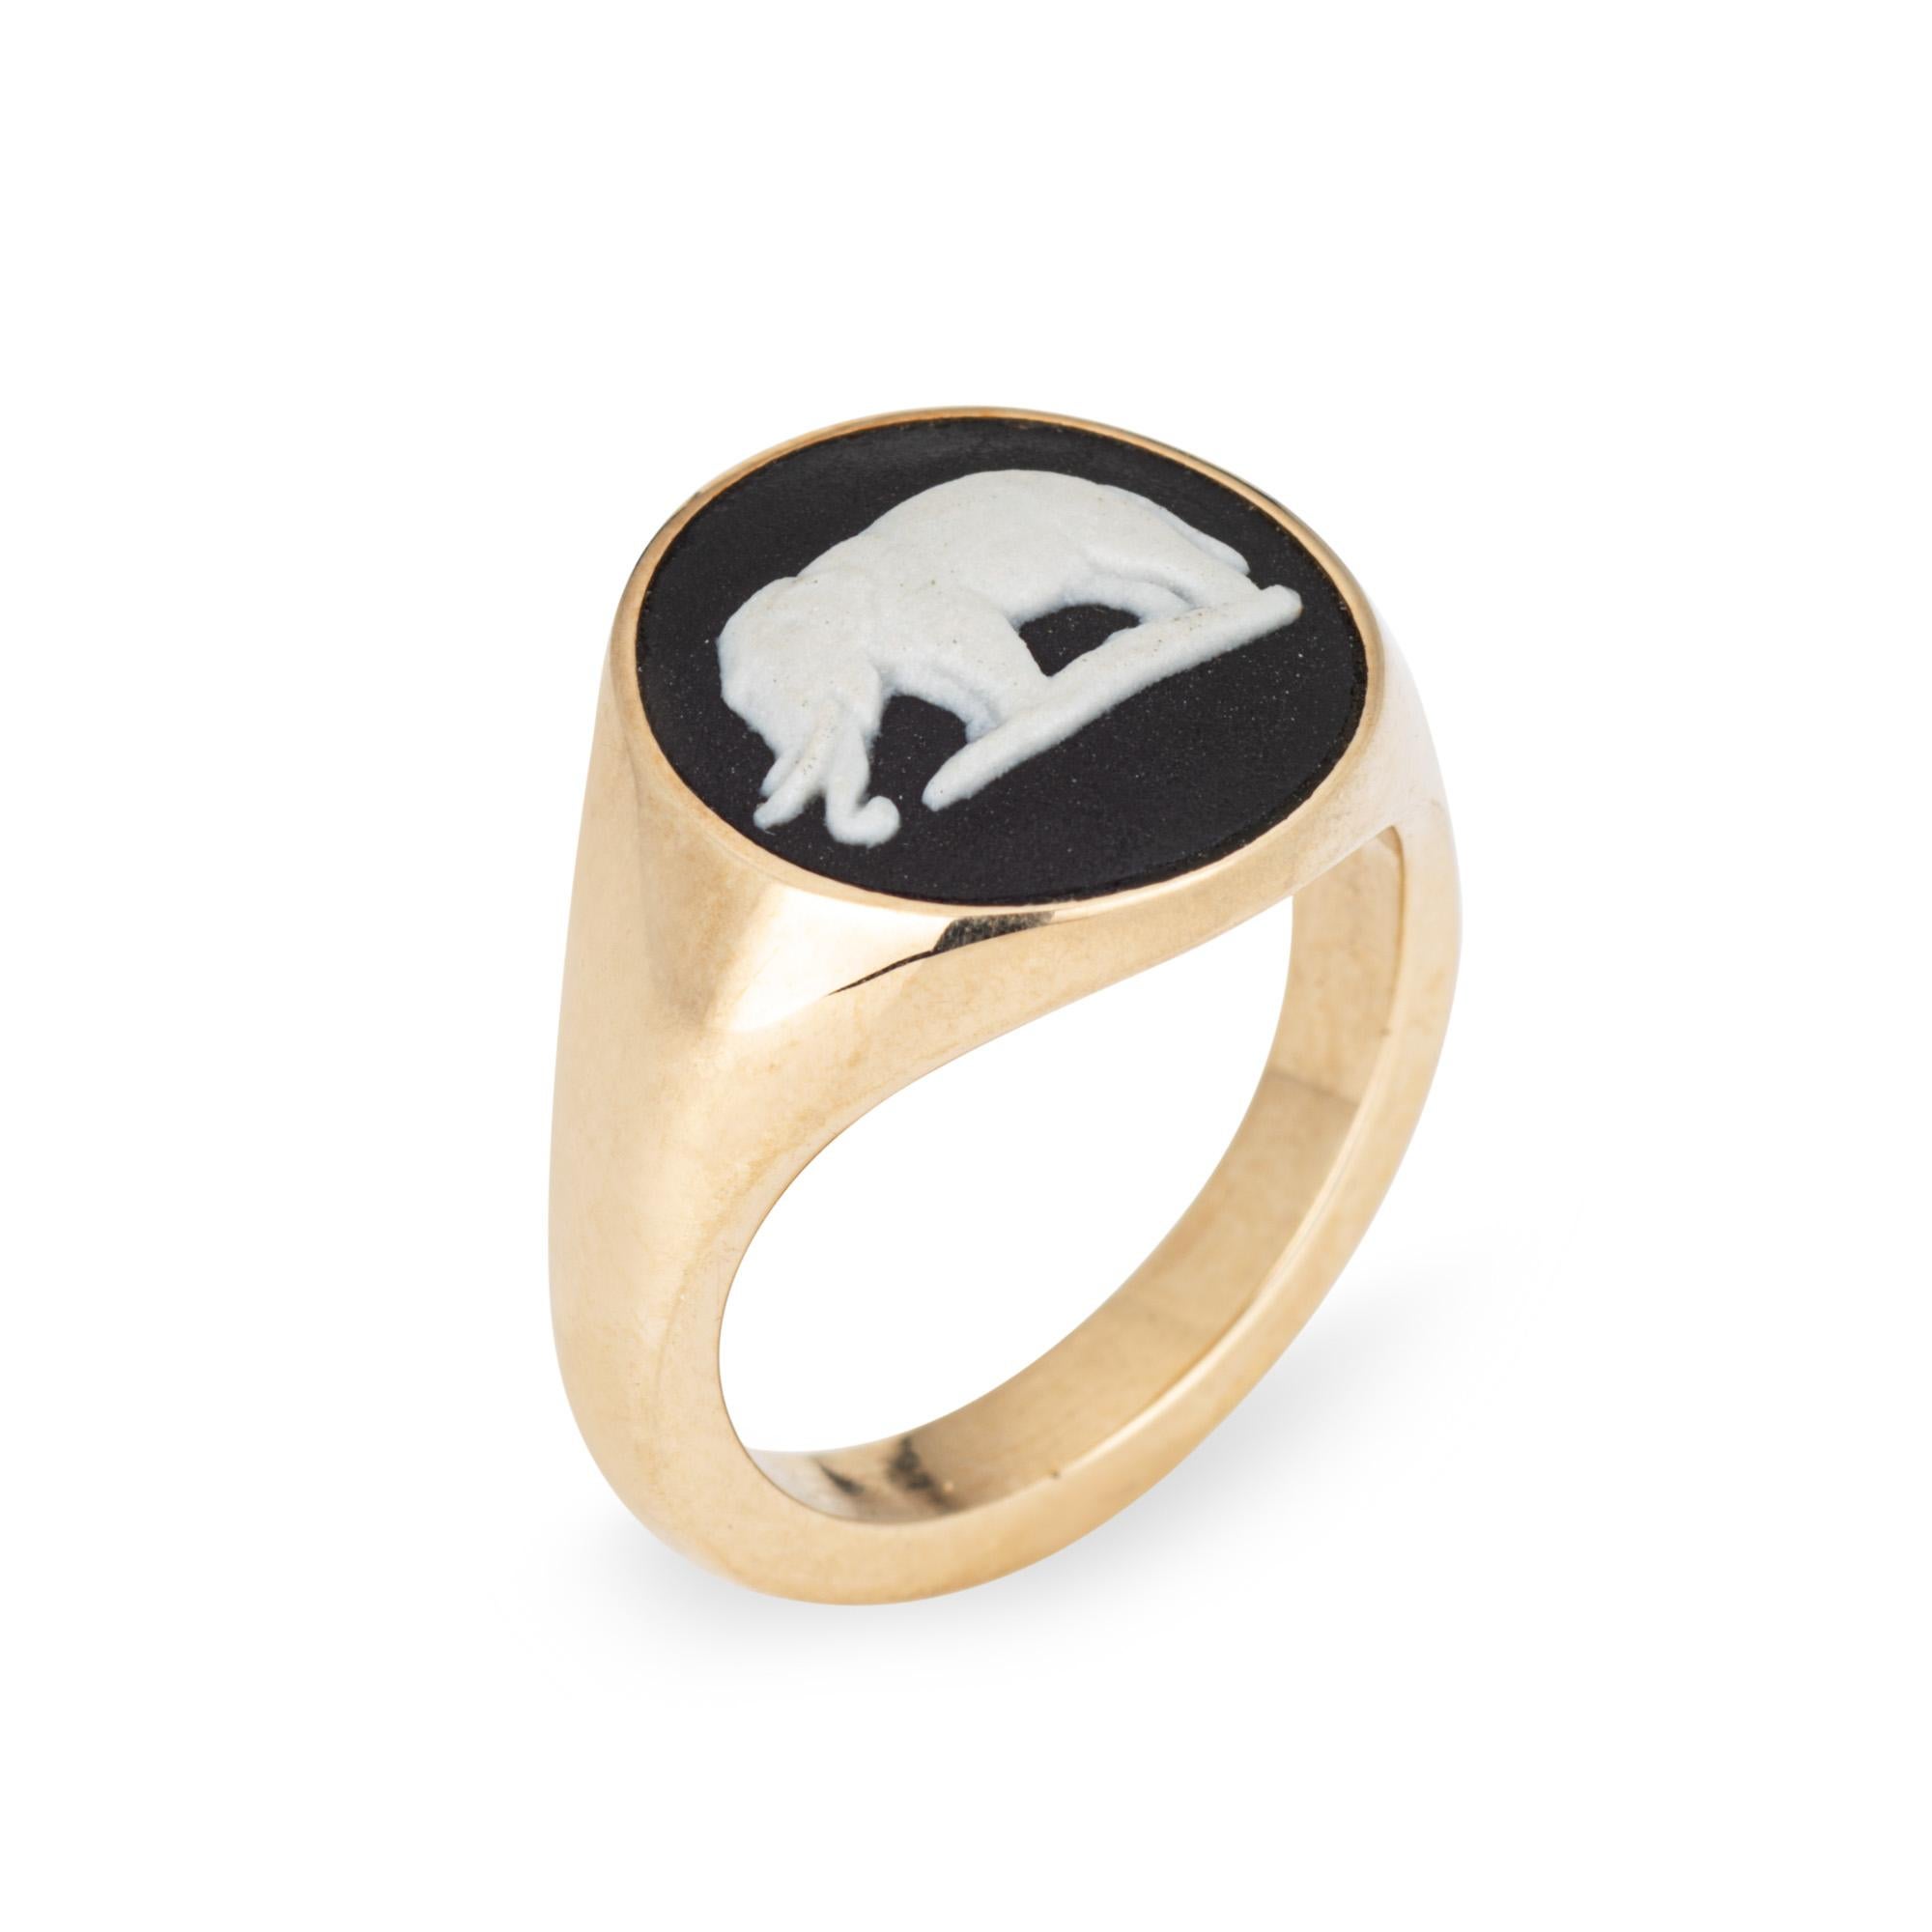 Stylish Ferian elephant signet ring crafted in 9 karat yellow gold. 

Wedgewood jasperware measures 13mm diameter (in very good condition and free of cracks or chips). 

Made in Hatton Garden, England by Ferian (Founded in 2017), the signet ring